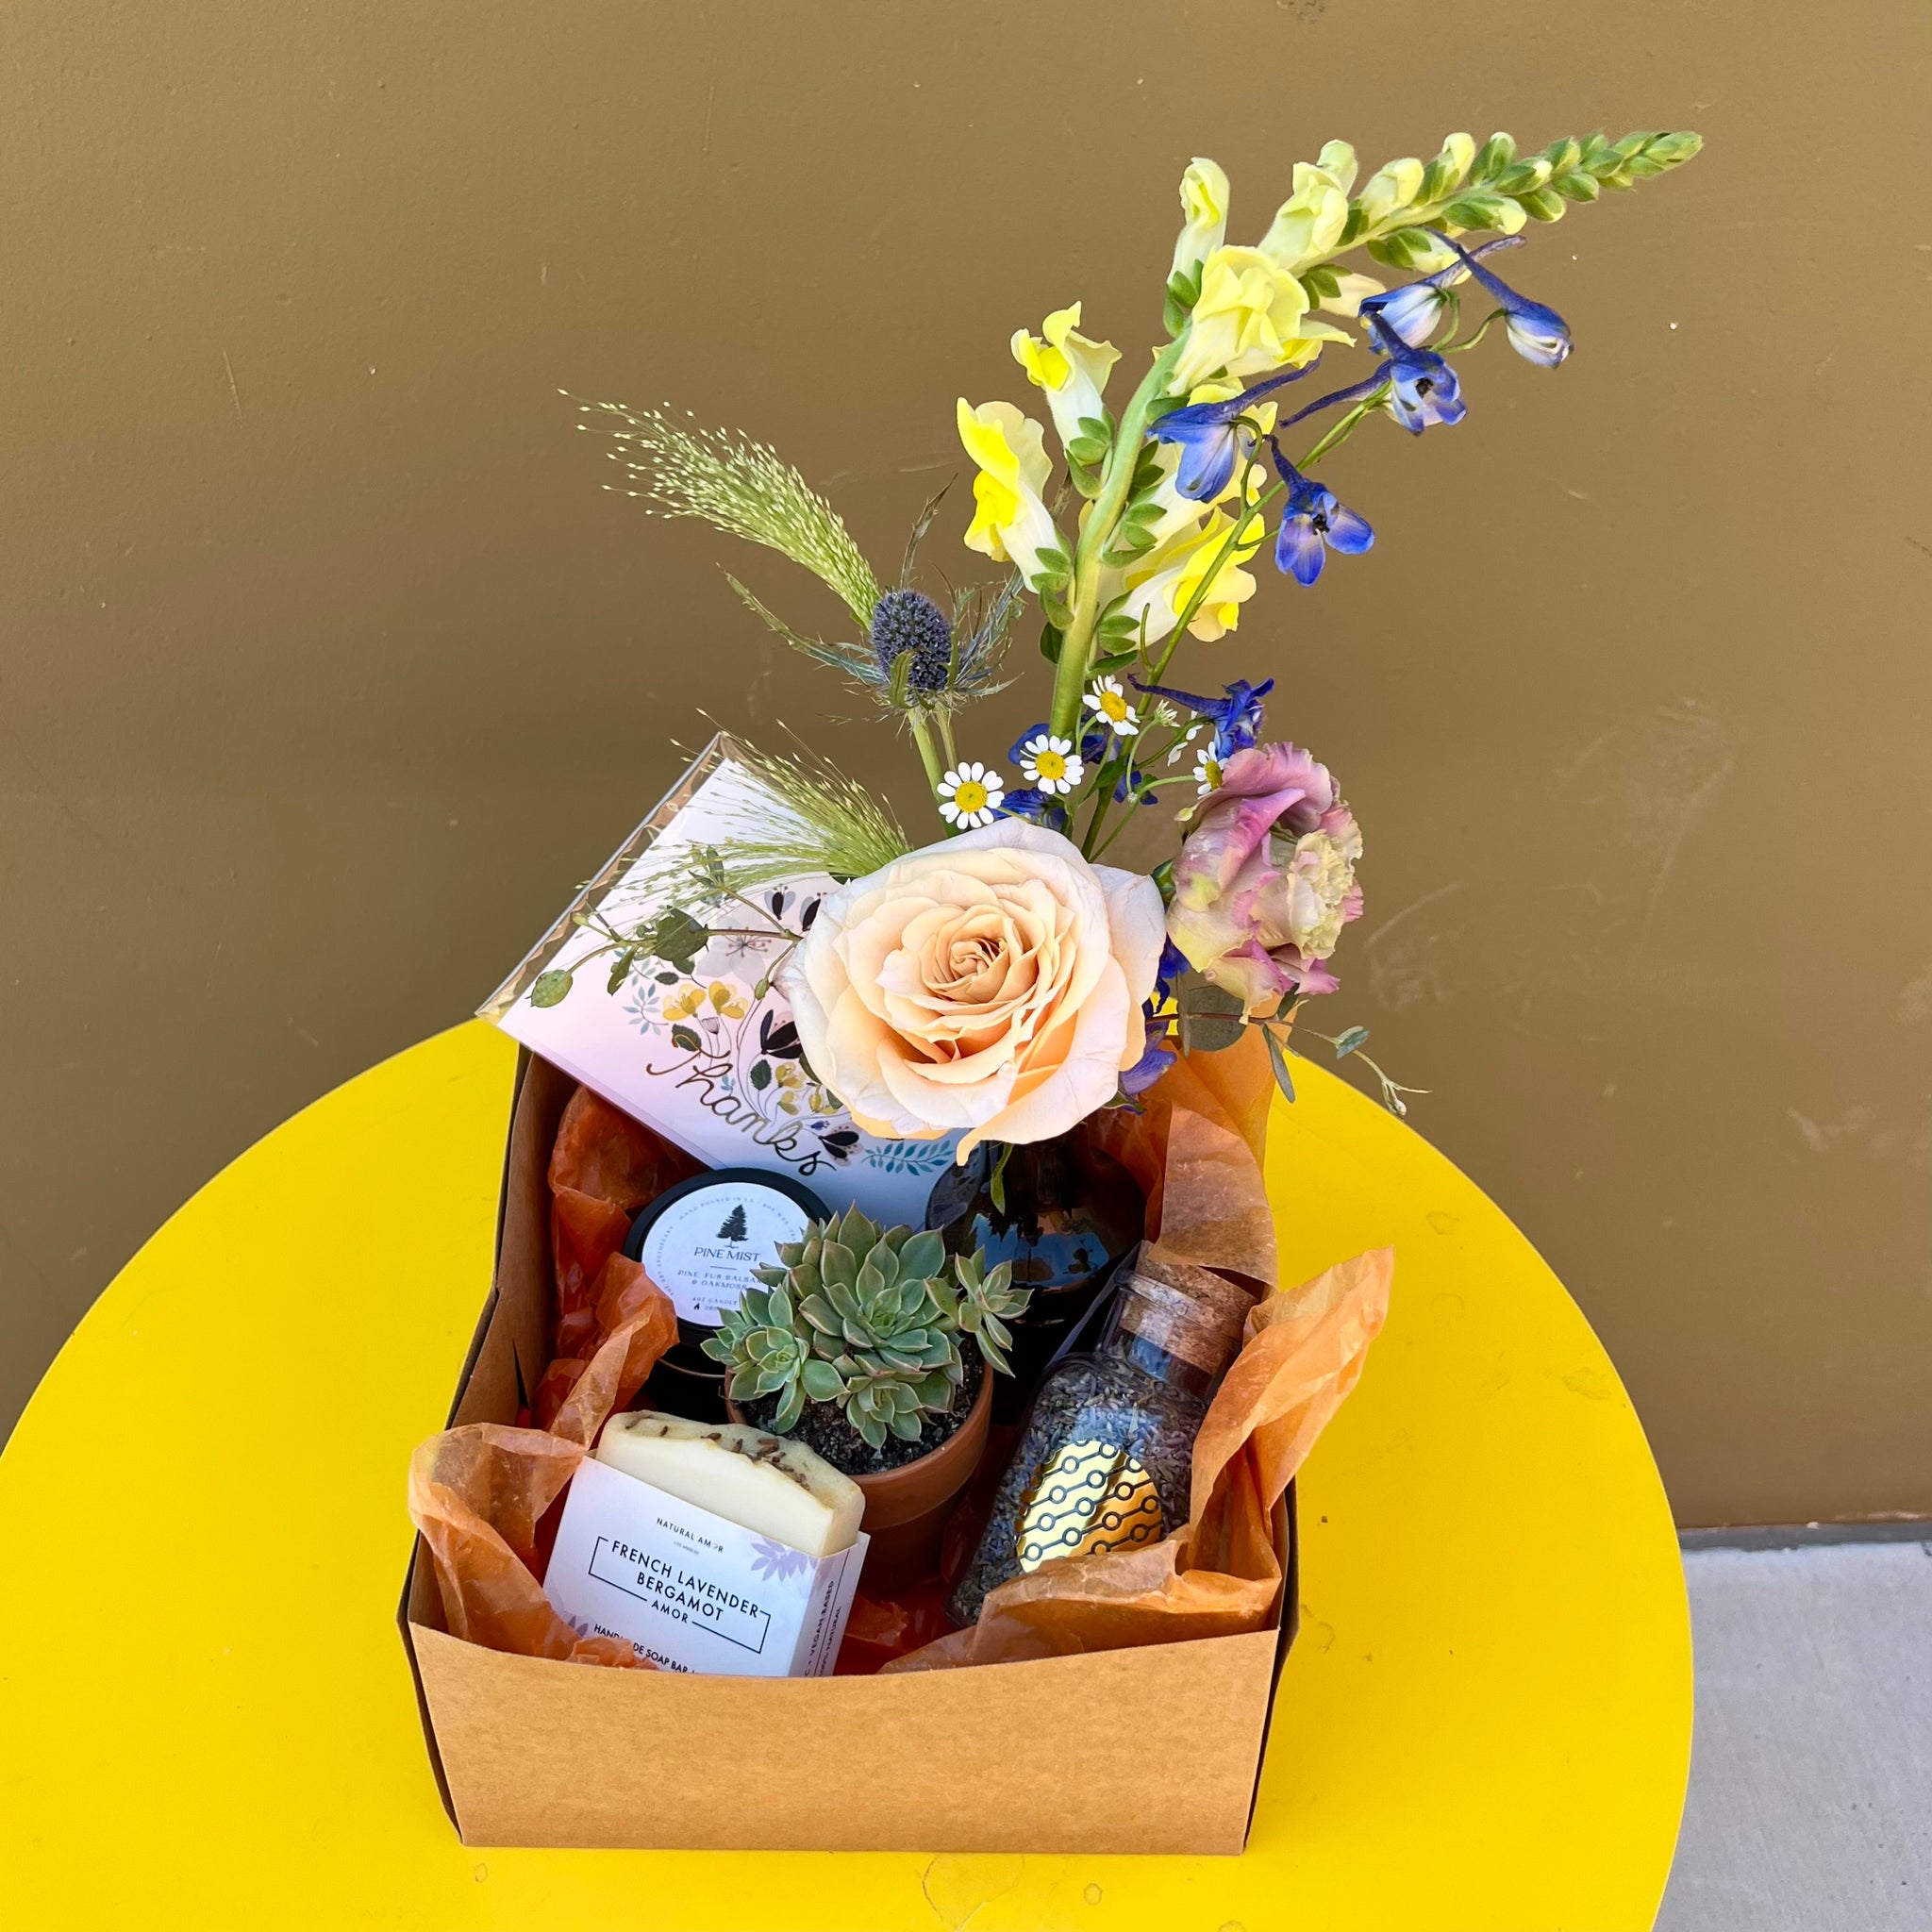 Flowers, Succulents, and Goodies Gift Box - The English Garden